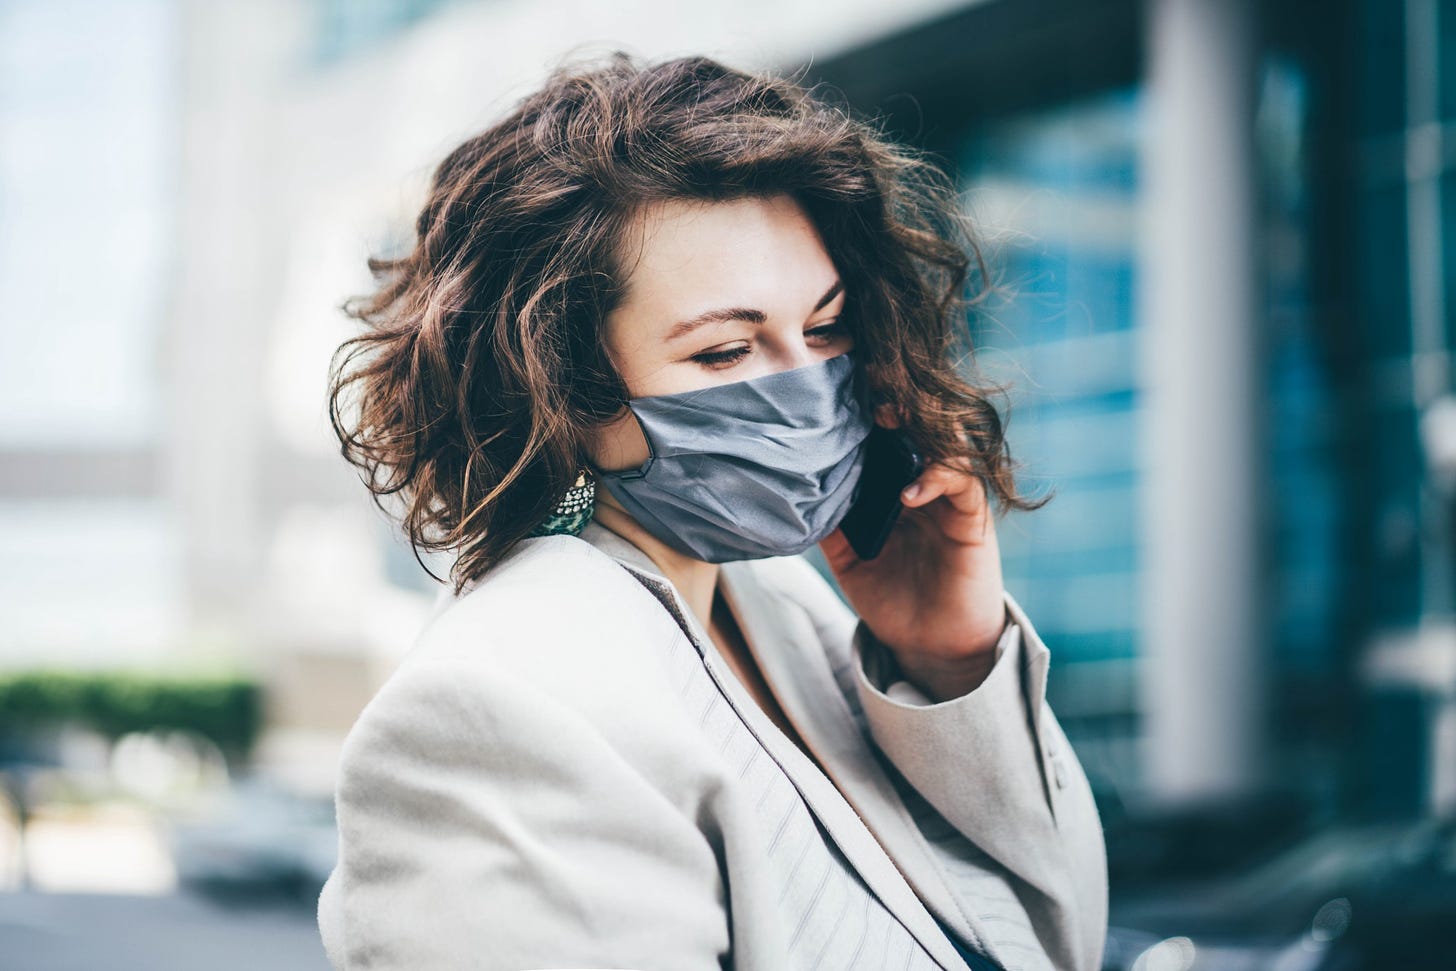 A stylish woman with short brown hair smiles behind a mask in the city.